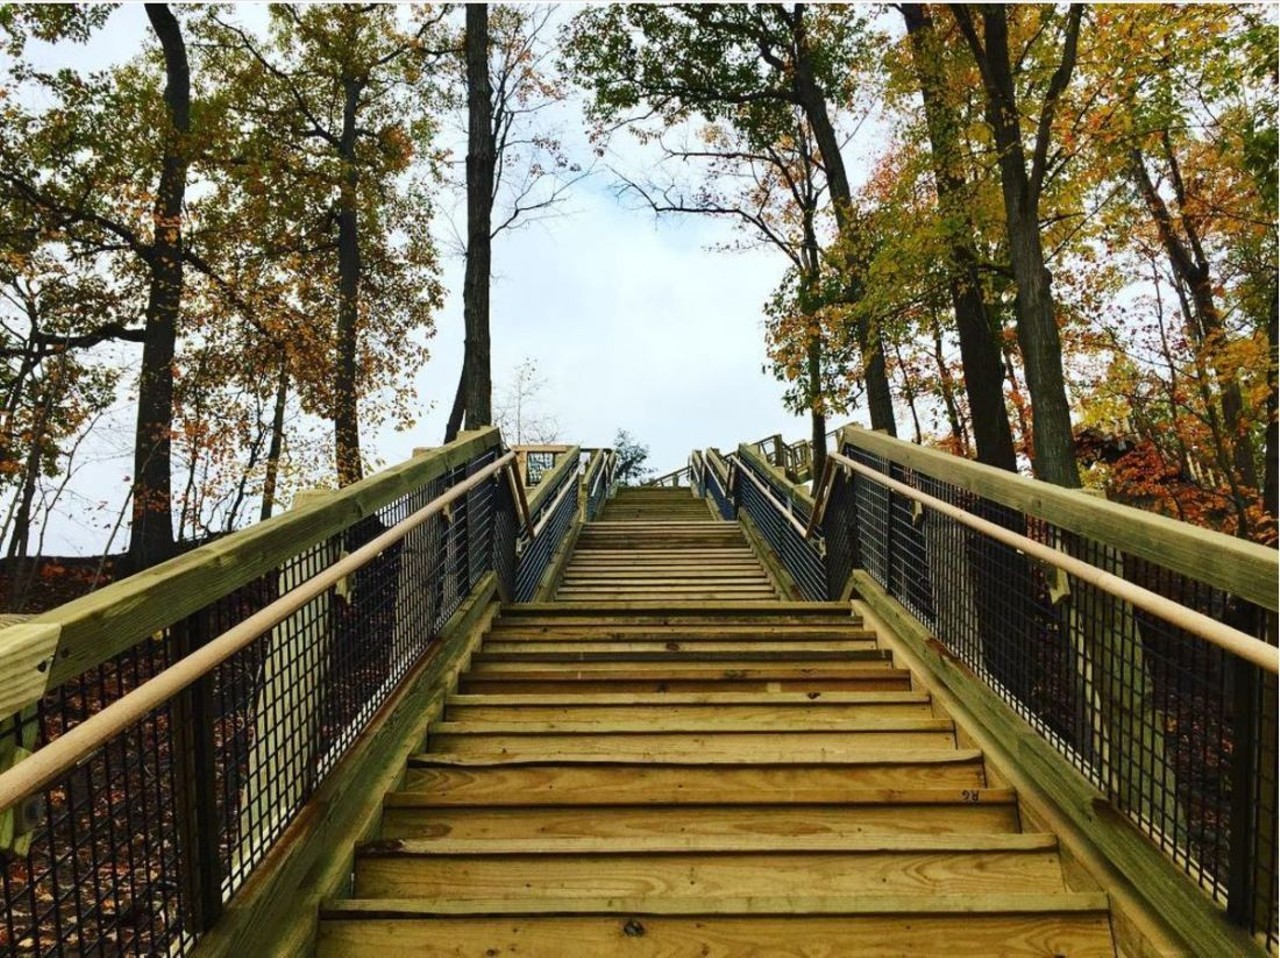 Fort Hill Stairs
440-734-6660, 24000 Valley Pkwy, North Olmsted
Climbing up all of these steps is well worth the effort, as they'll take you to one of the best views in Cleveland. They're located right behind the Rocky River Nature Center.
Photo via clevemetroparks/Instagram